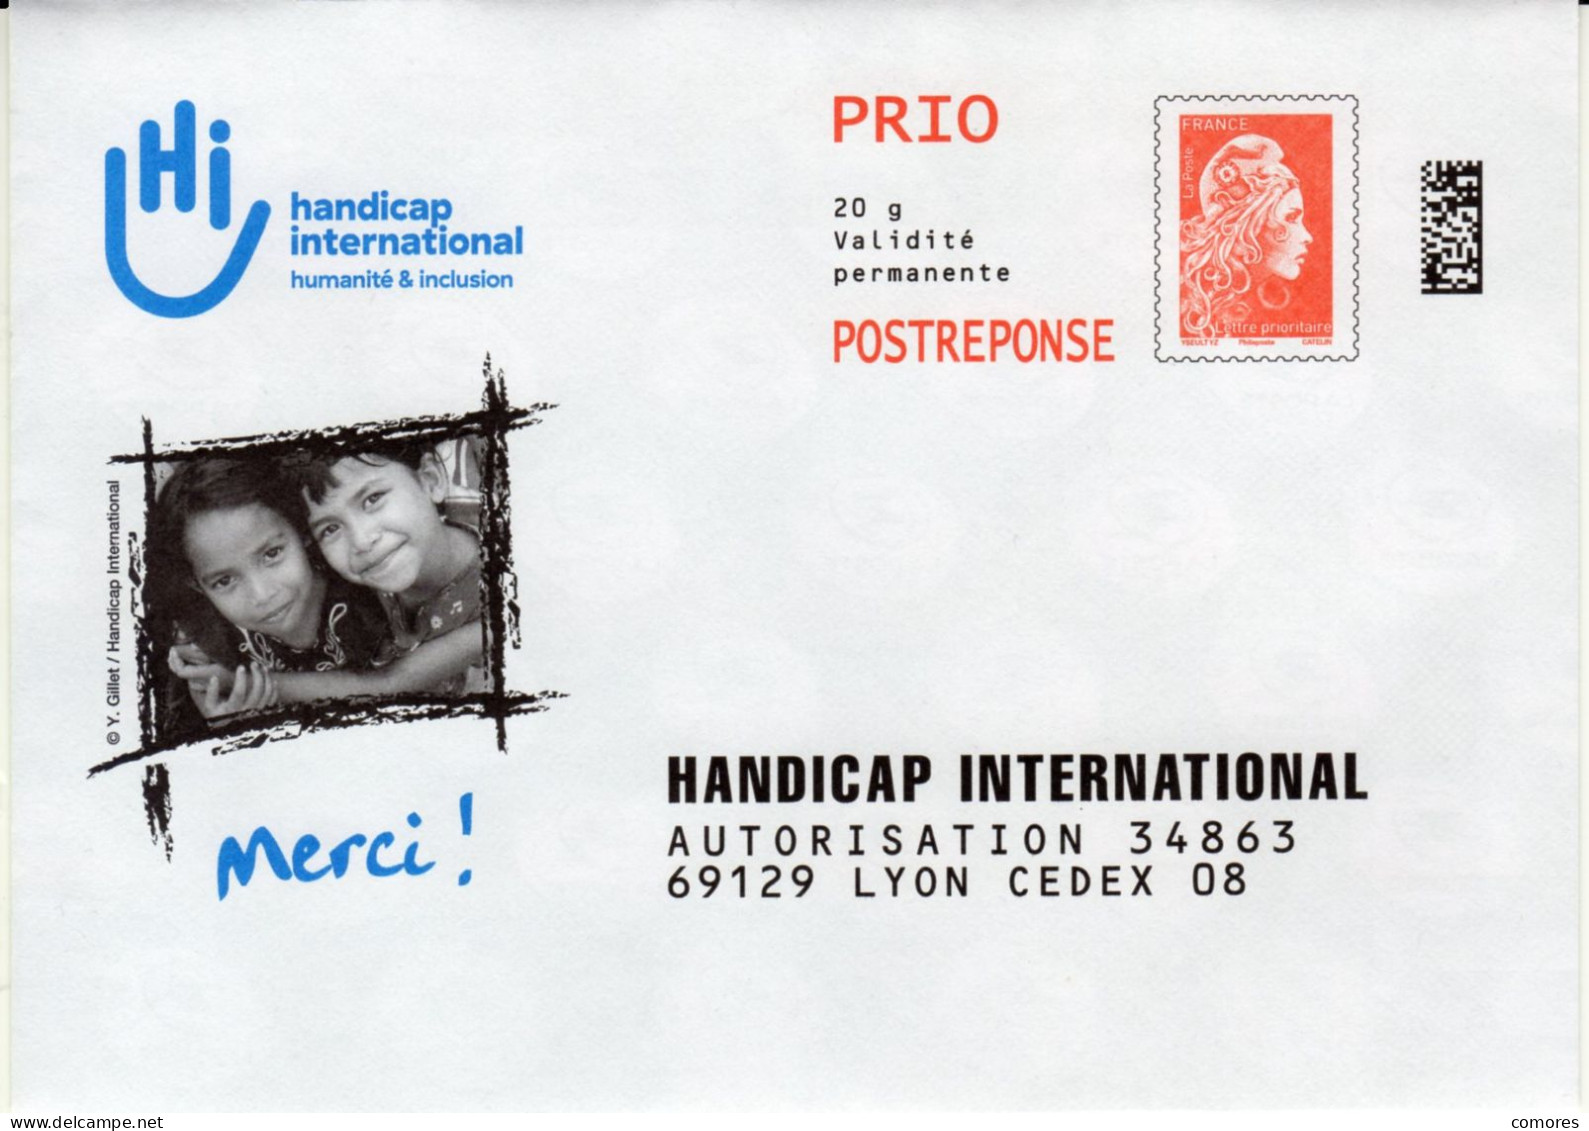 Pret A Poster Reponse PRIO (PAP) Handicap International Agr.368026 (Marianne Yseult-Catelin) - PAP: Antwort